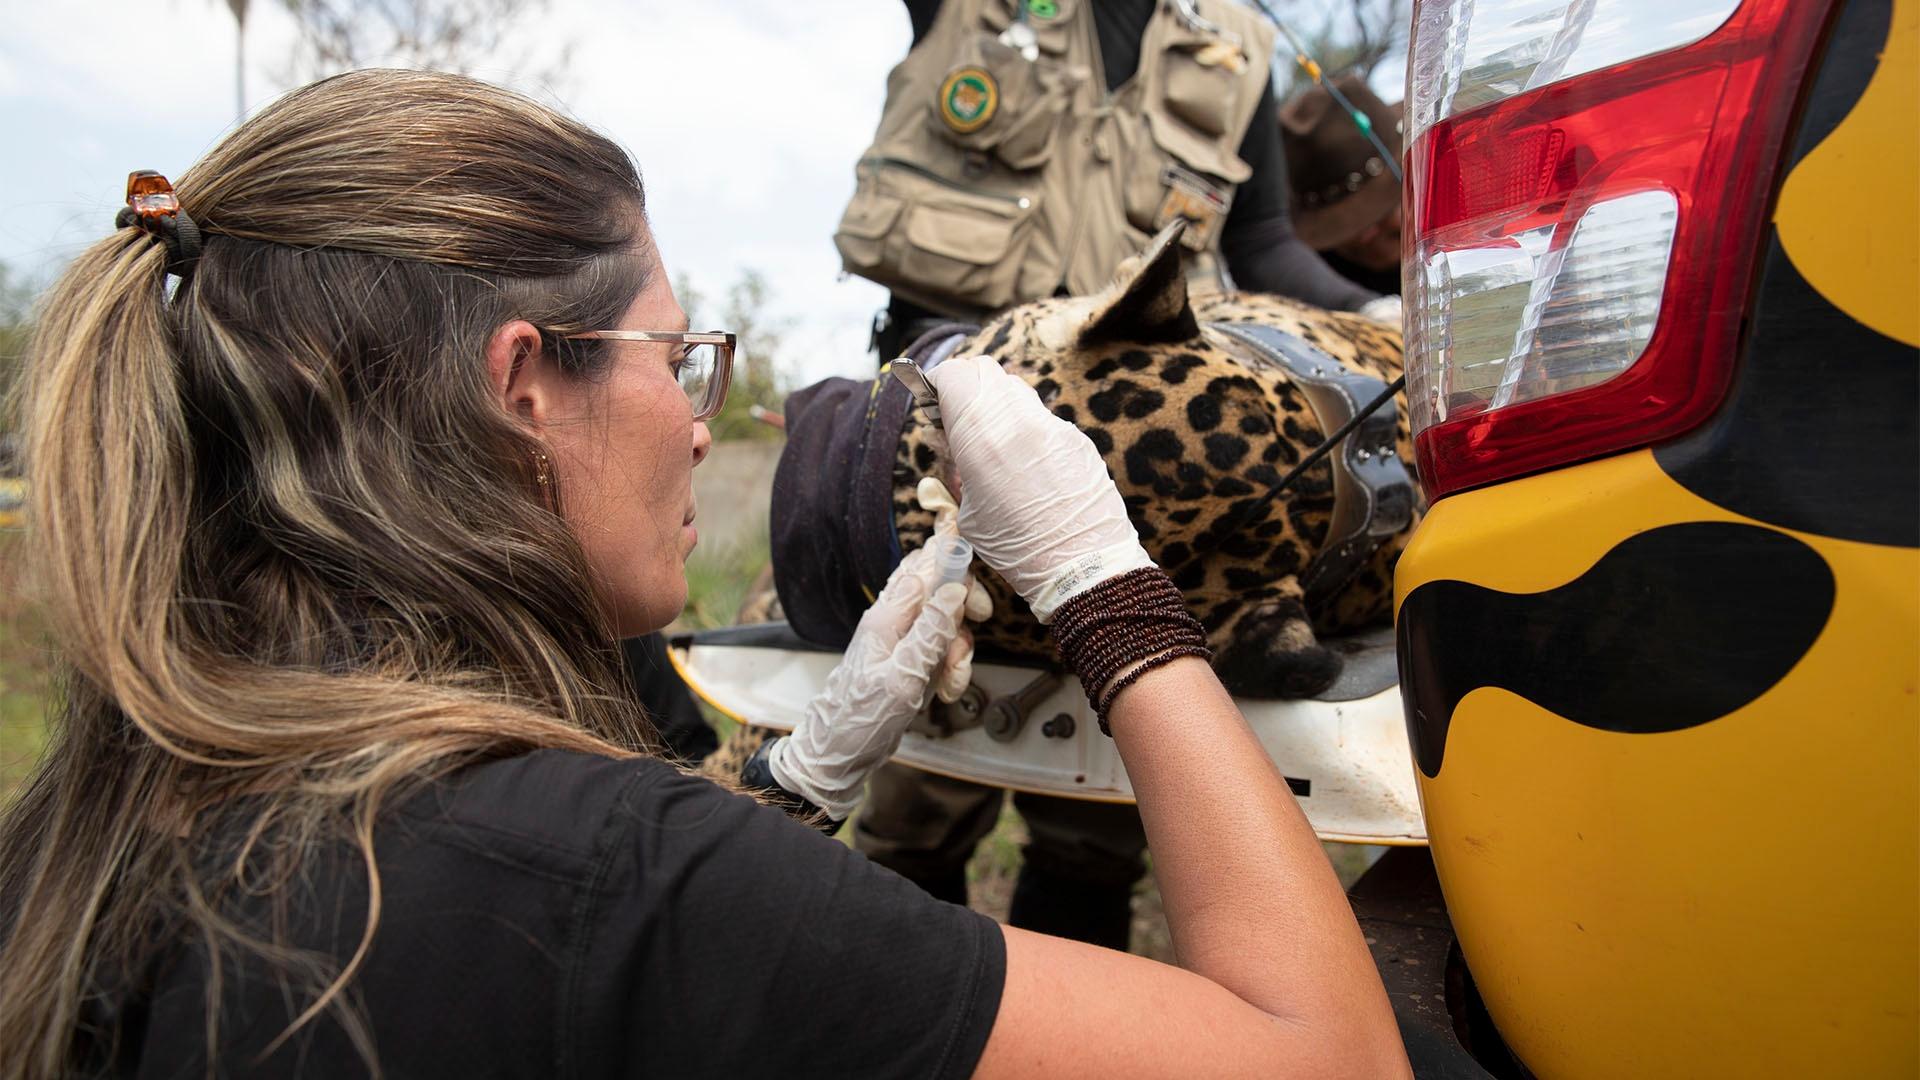 A woman with her back turned while examining a jaguar.